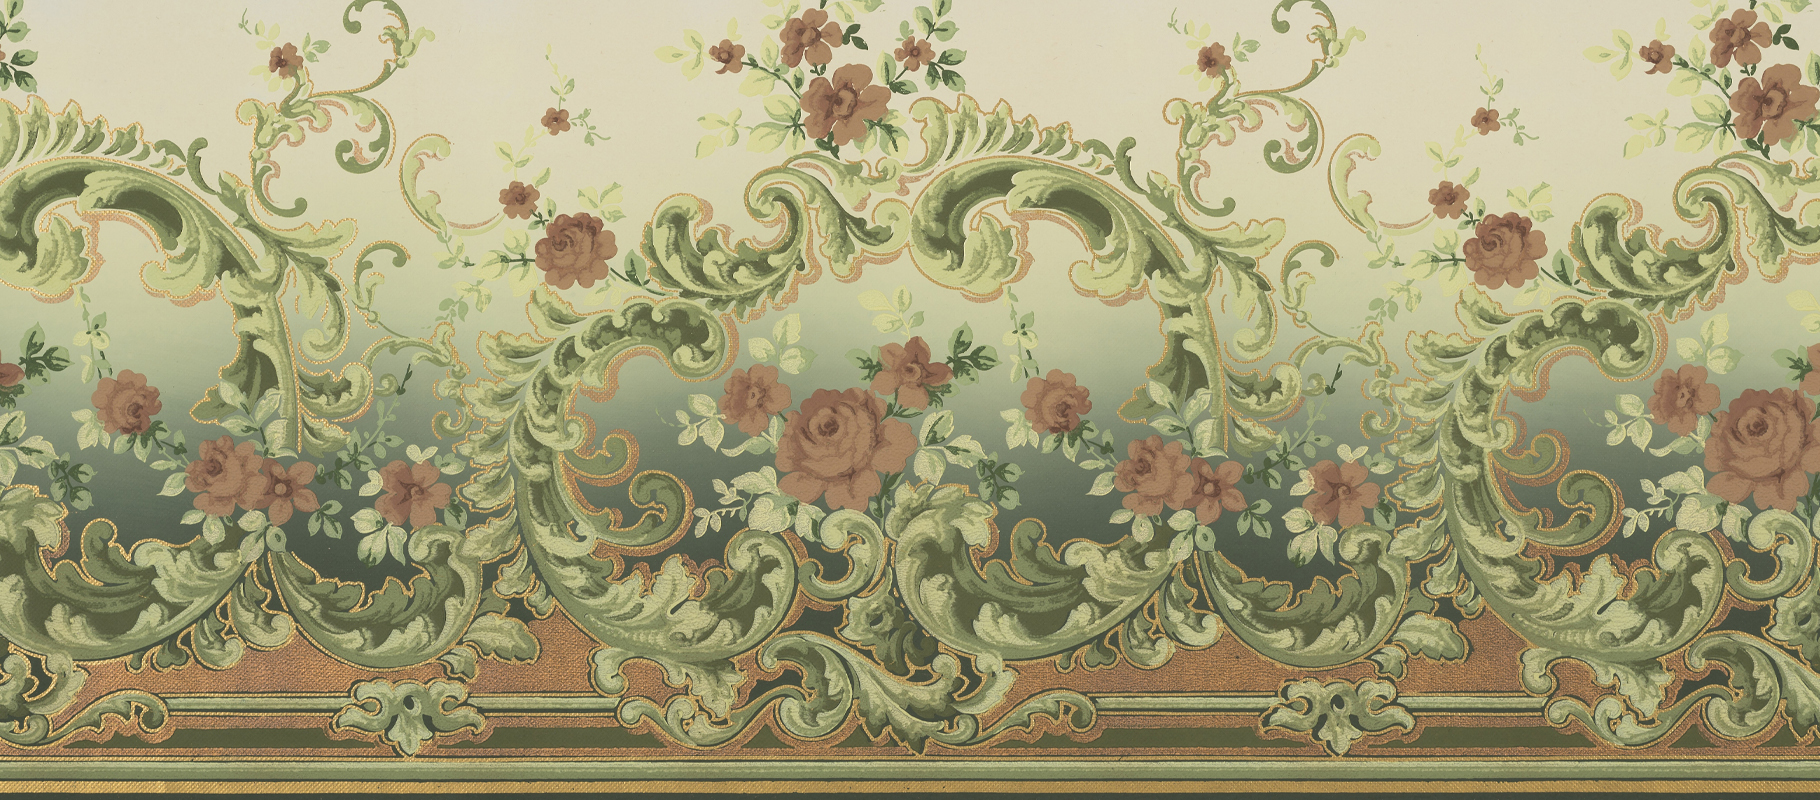 The 11 Most Iconic Wallpaper Prints and the History Behind Them